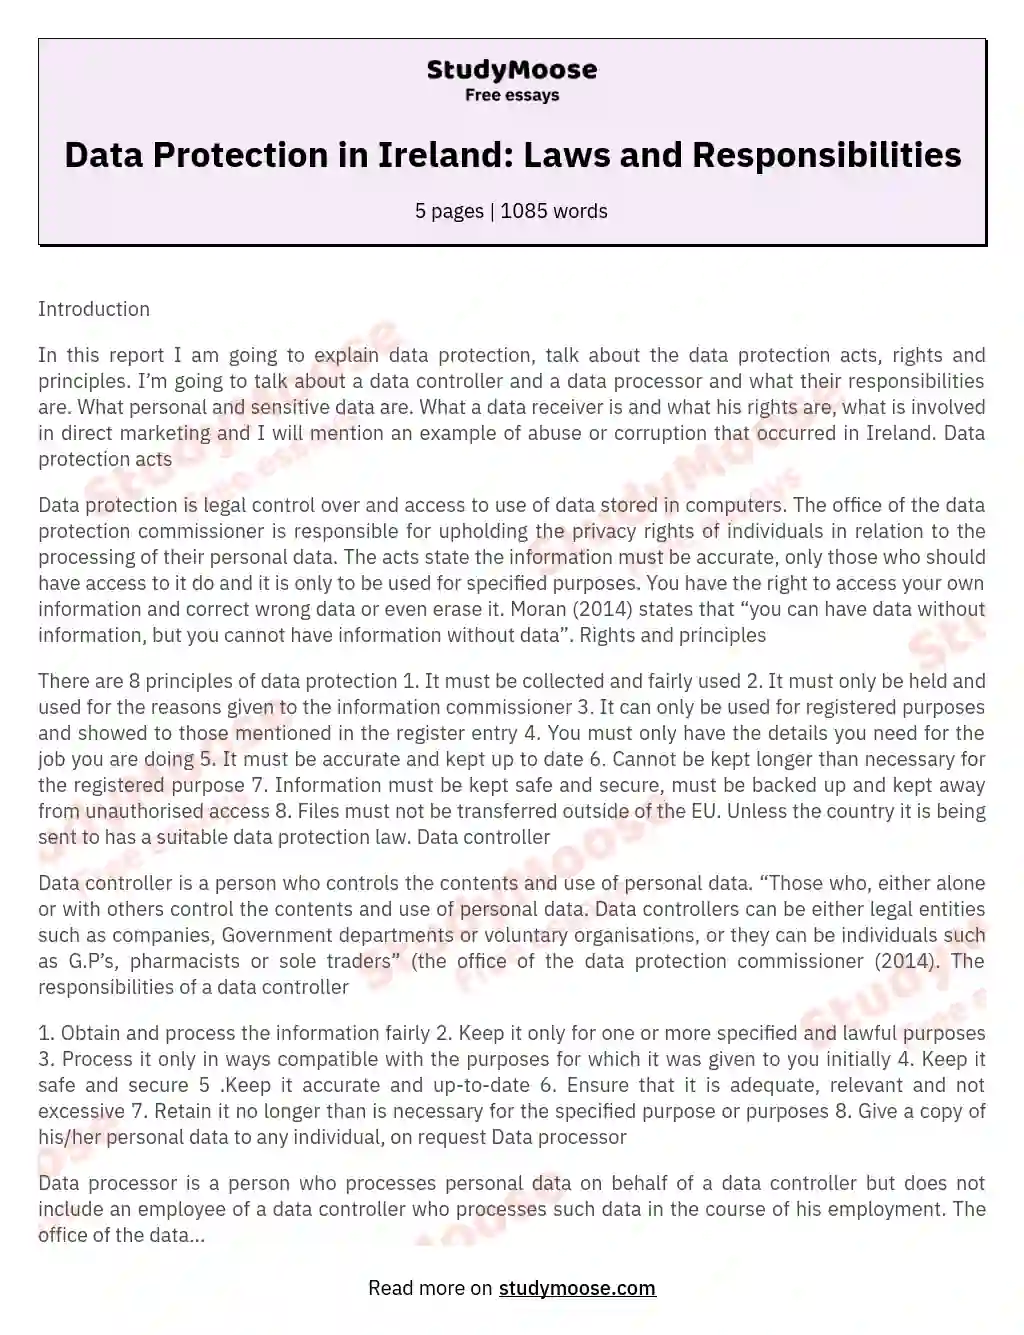 Data Protection in Ireland: Laws and Responsibilities essay